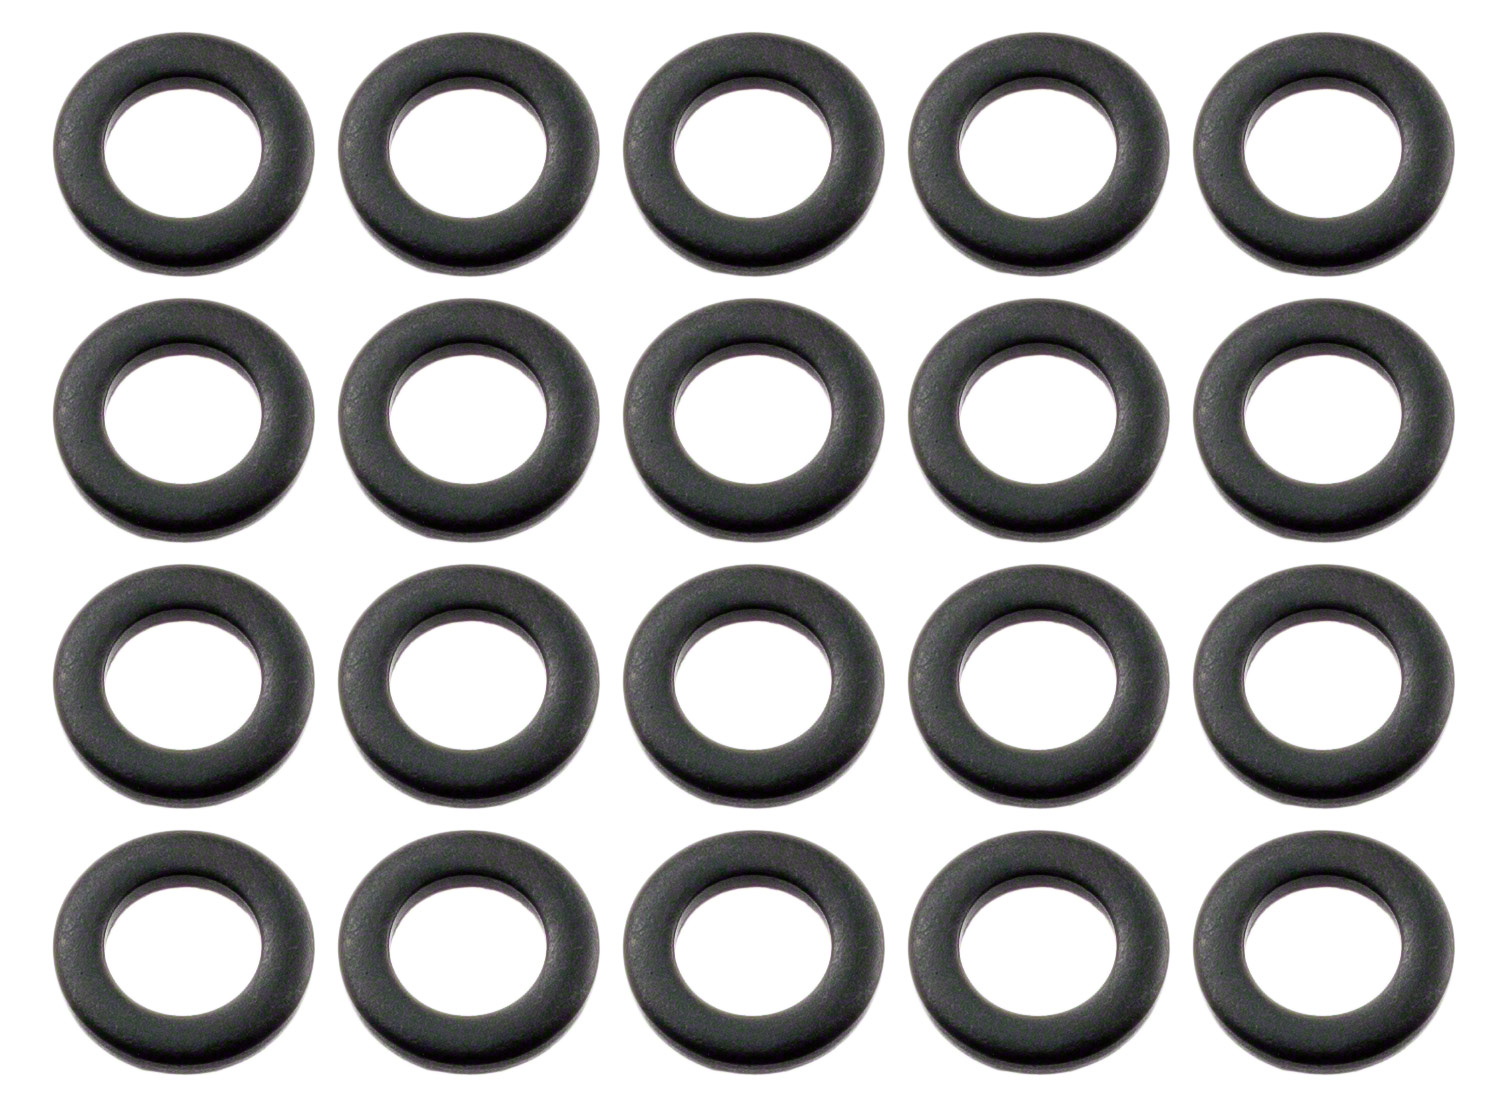 SPAREDRUM SW-BK - STEEL WASHER FOR TENSION RODS - BLACK (X20)